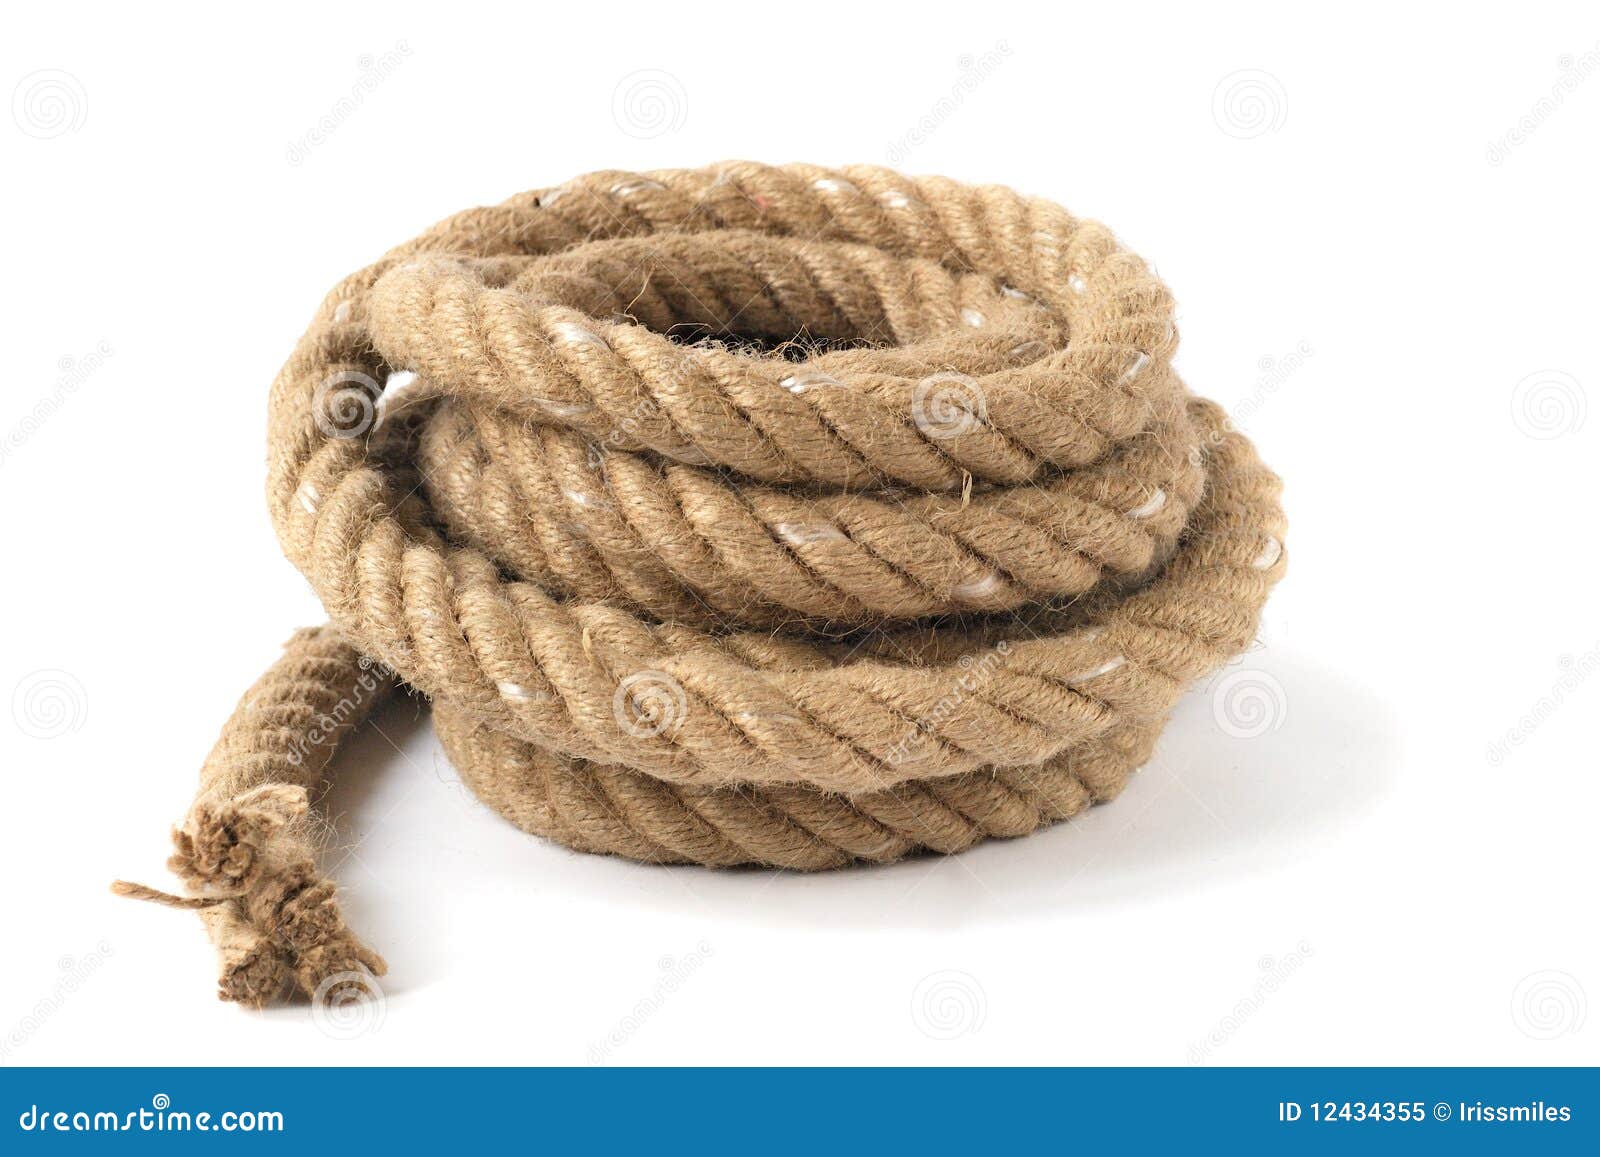 Thick strong rope stock image. Image of hairy, lace, close - 12434355